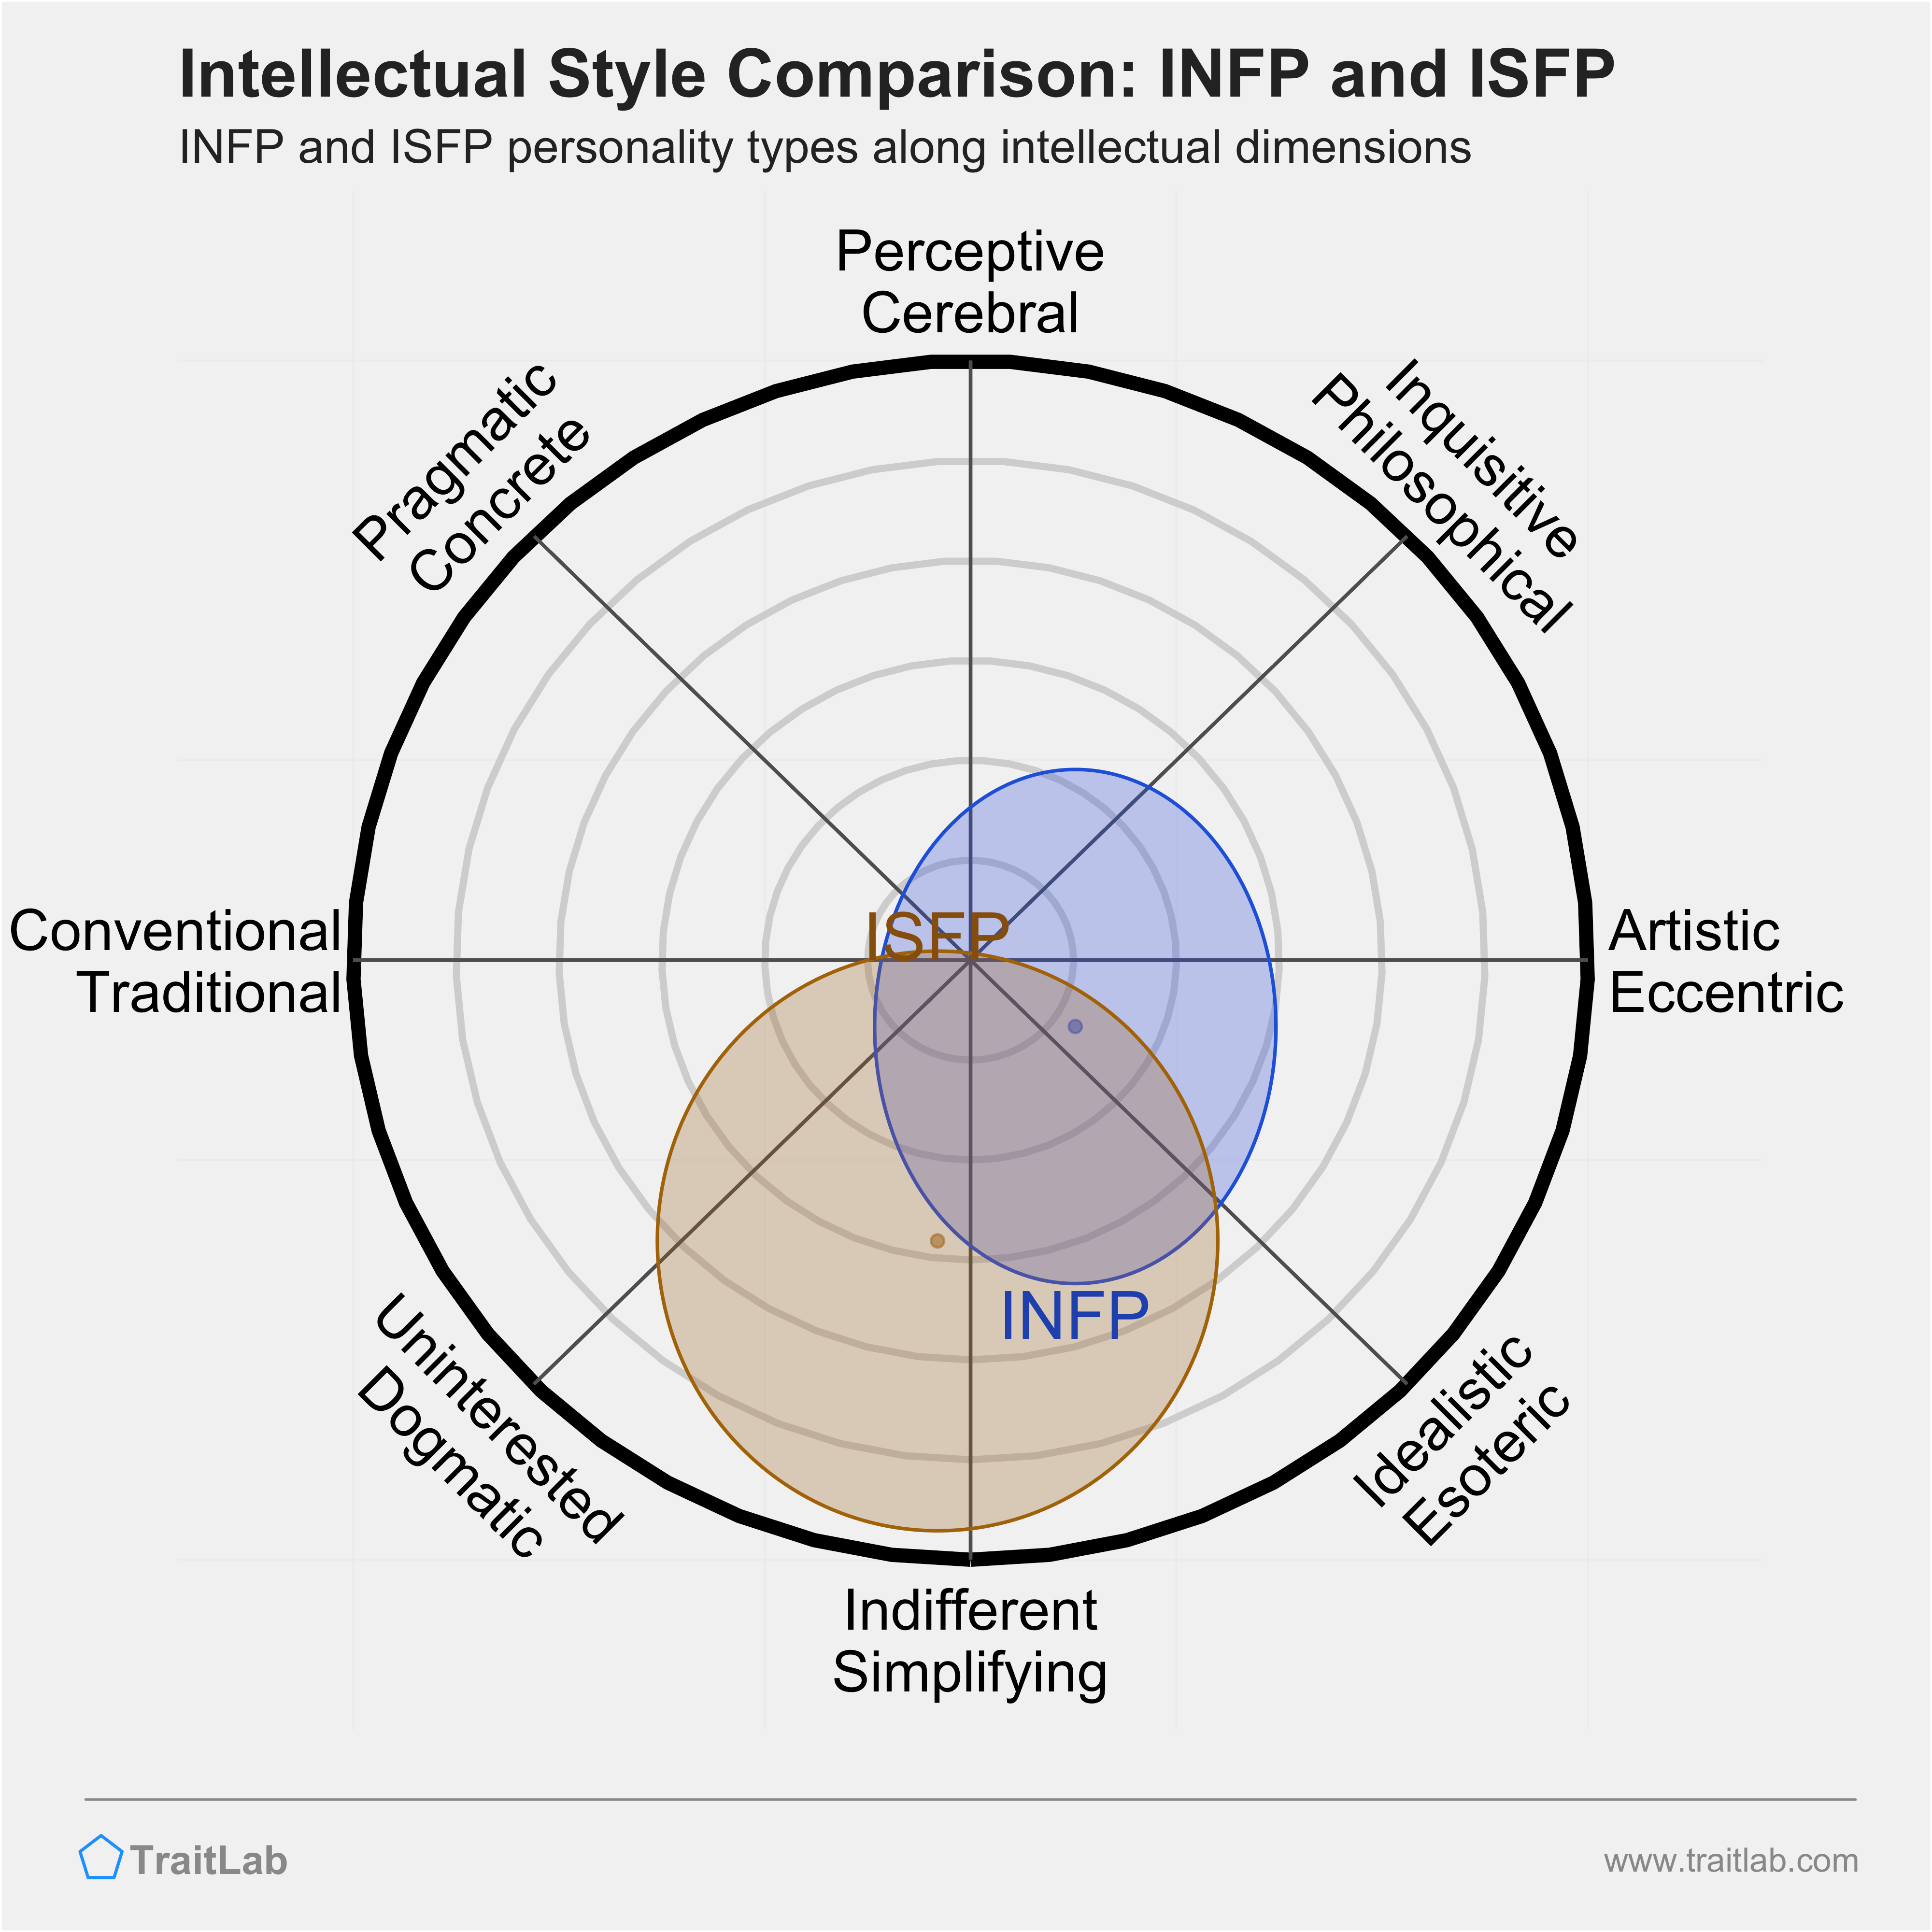 INFP and ISFP comparison across intellectual dimensions